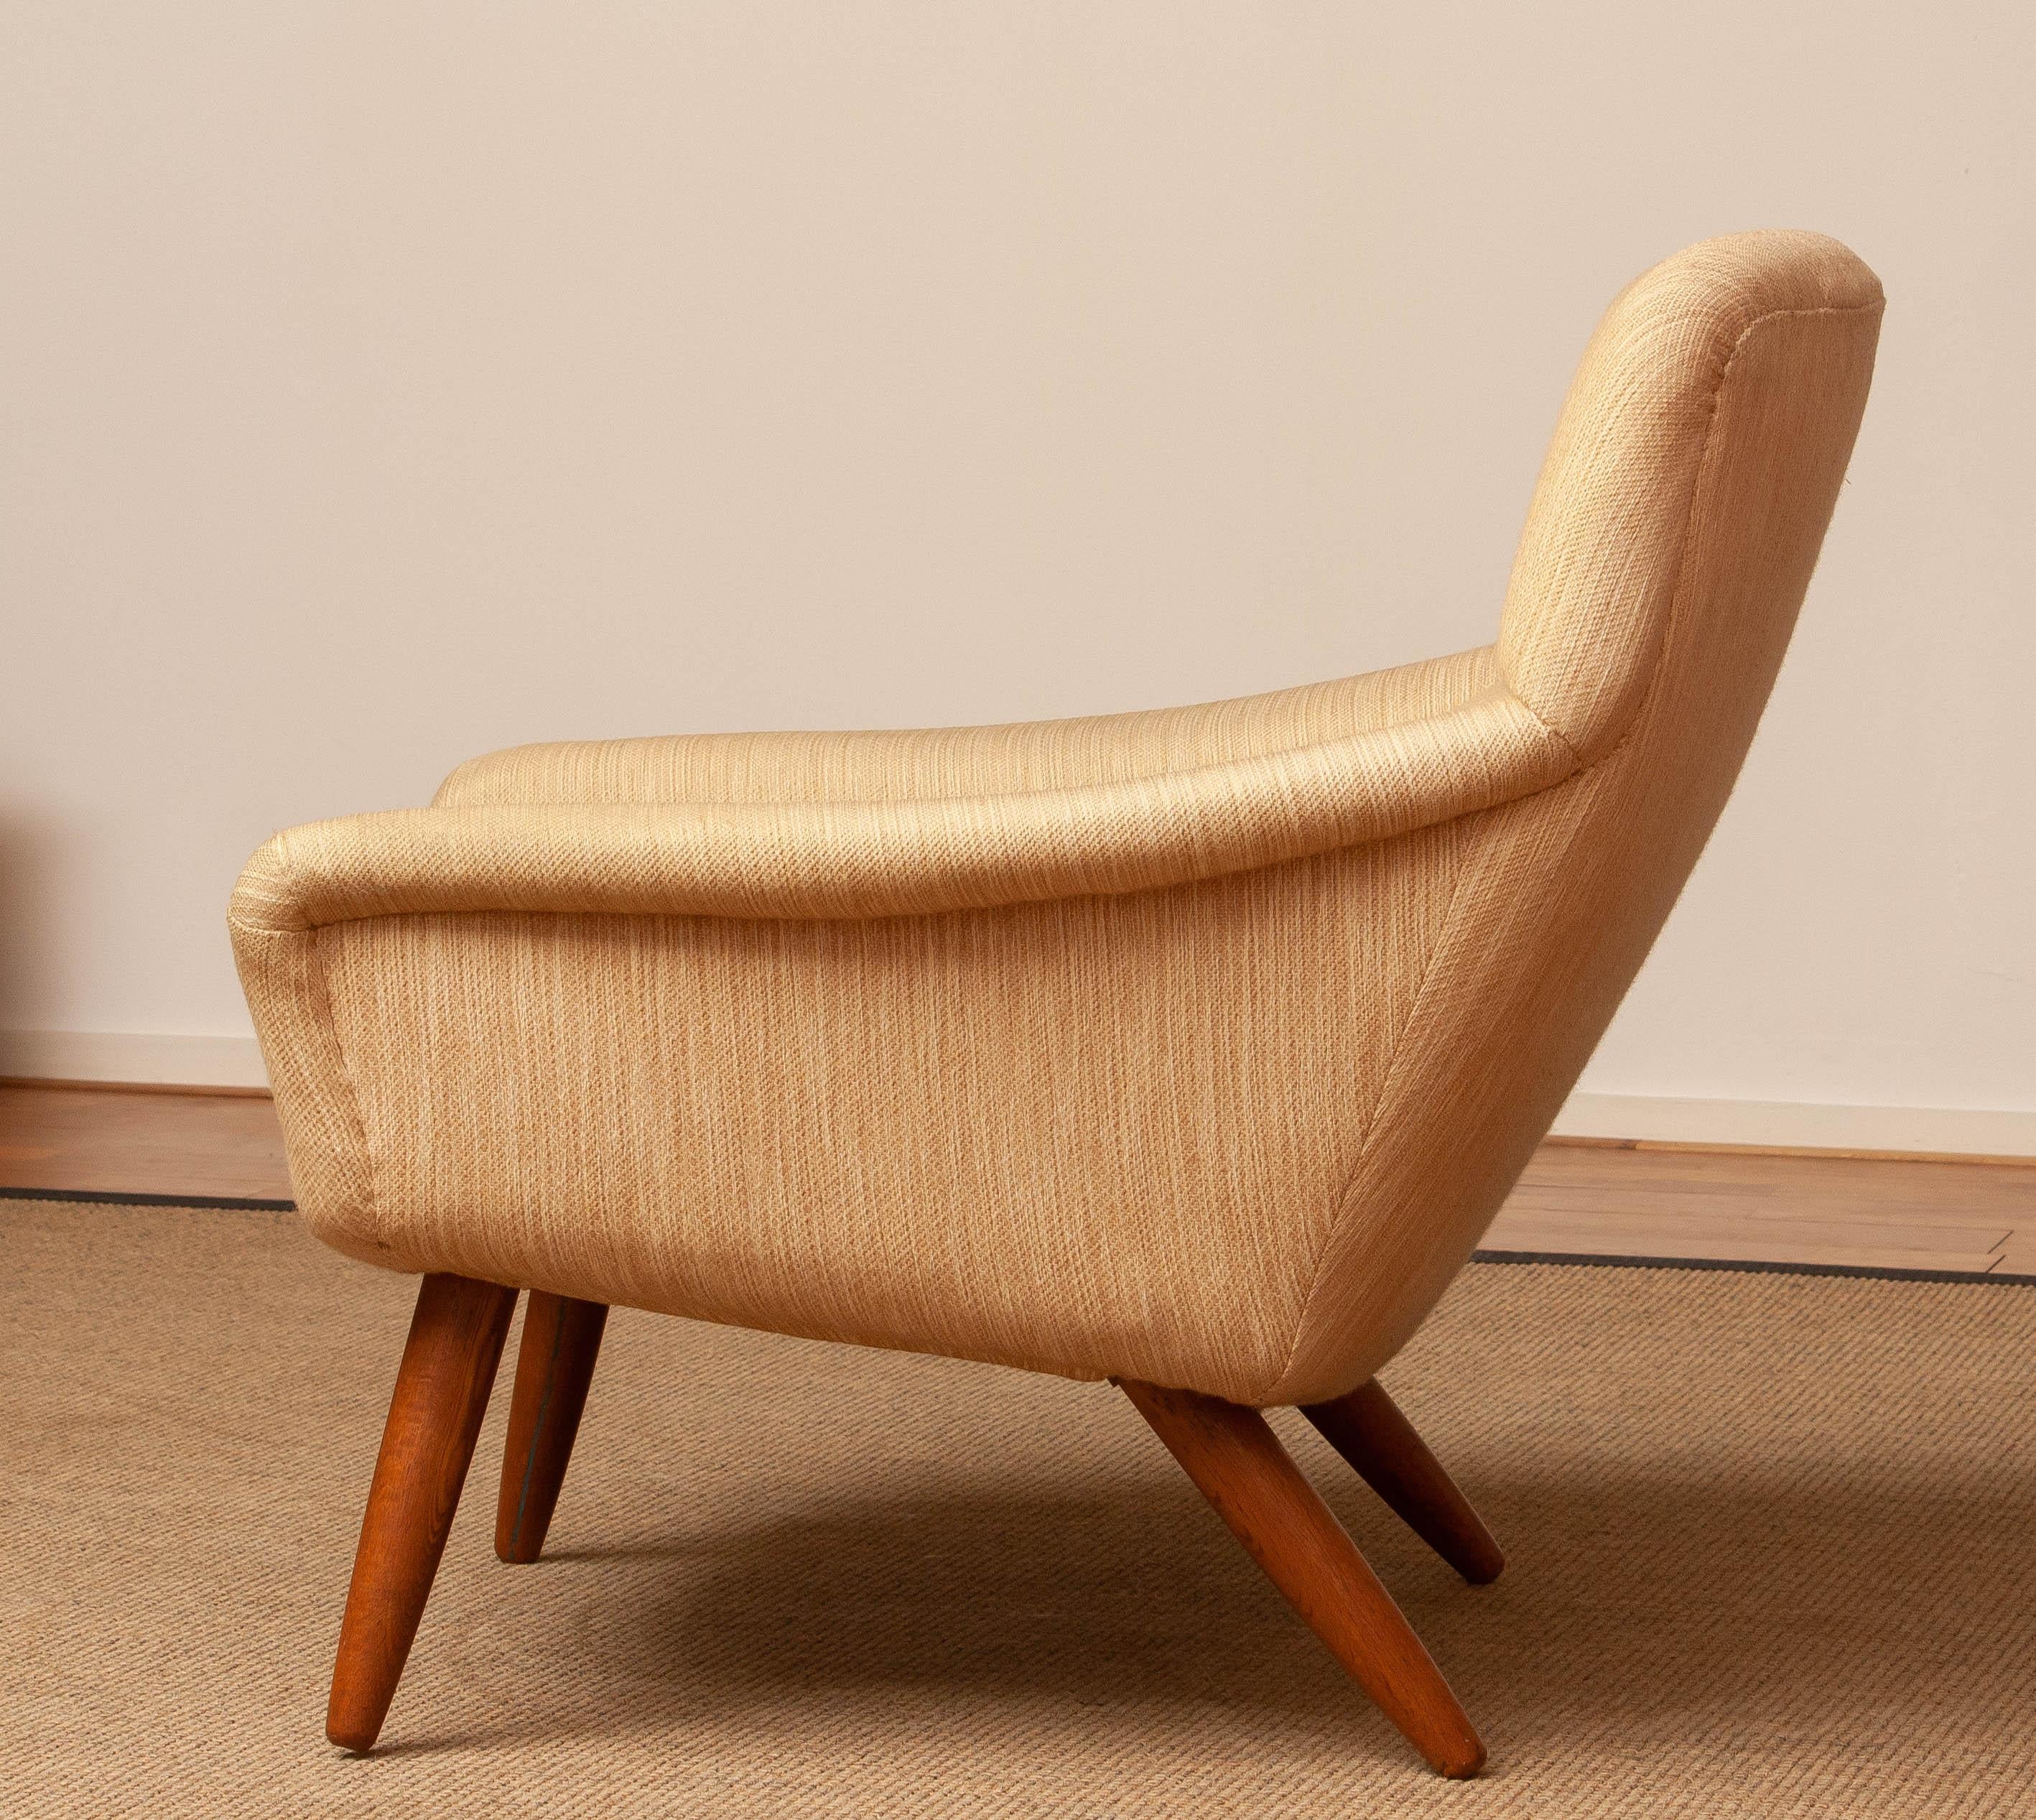 1960s Natural Wool and Oak Lounge Chair by Leif Hansen for Kronen in Denmark For Sale 2